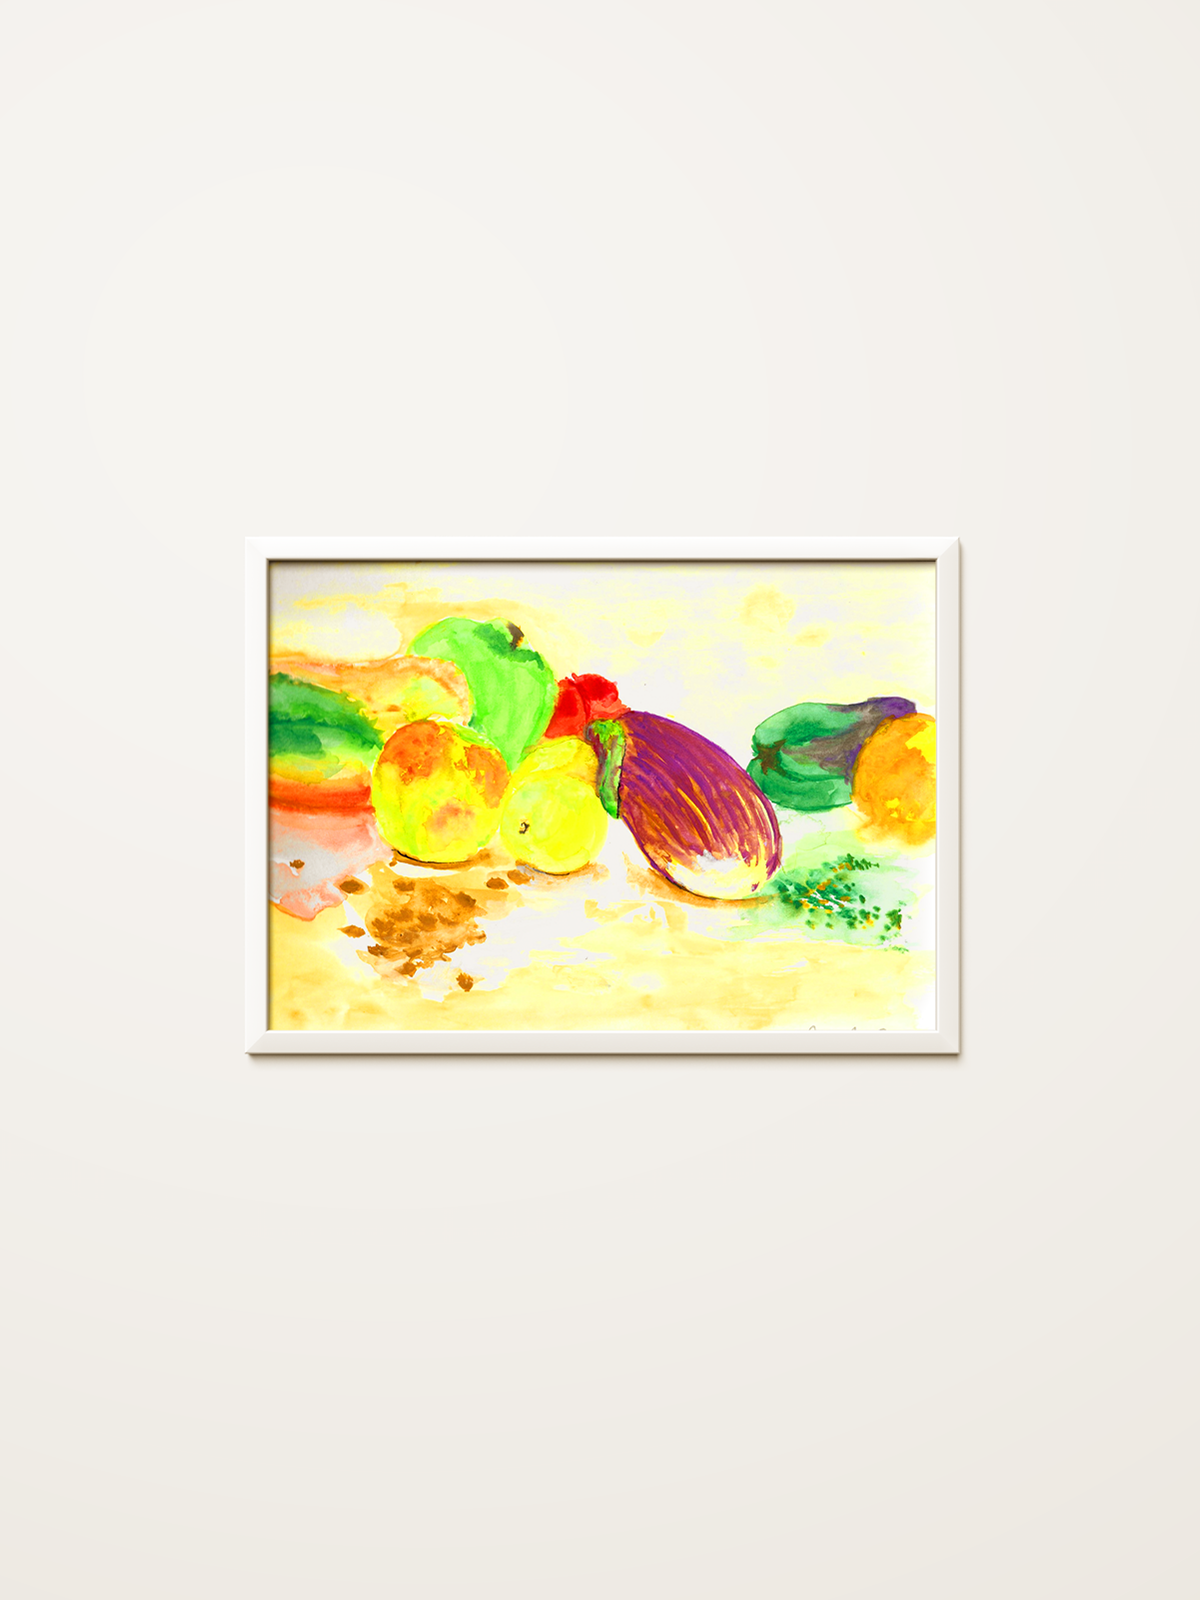 water color expressive found edge gradients painting   characters Imagery color Creativity